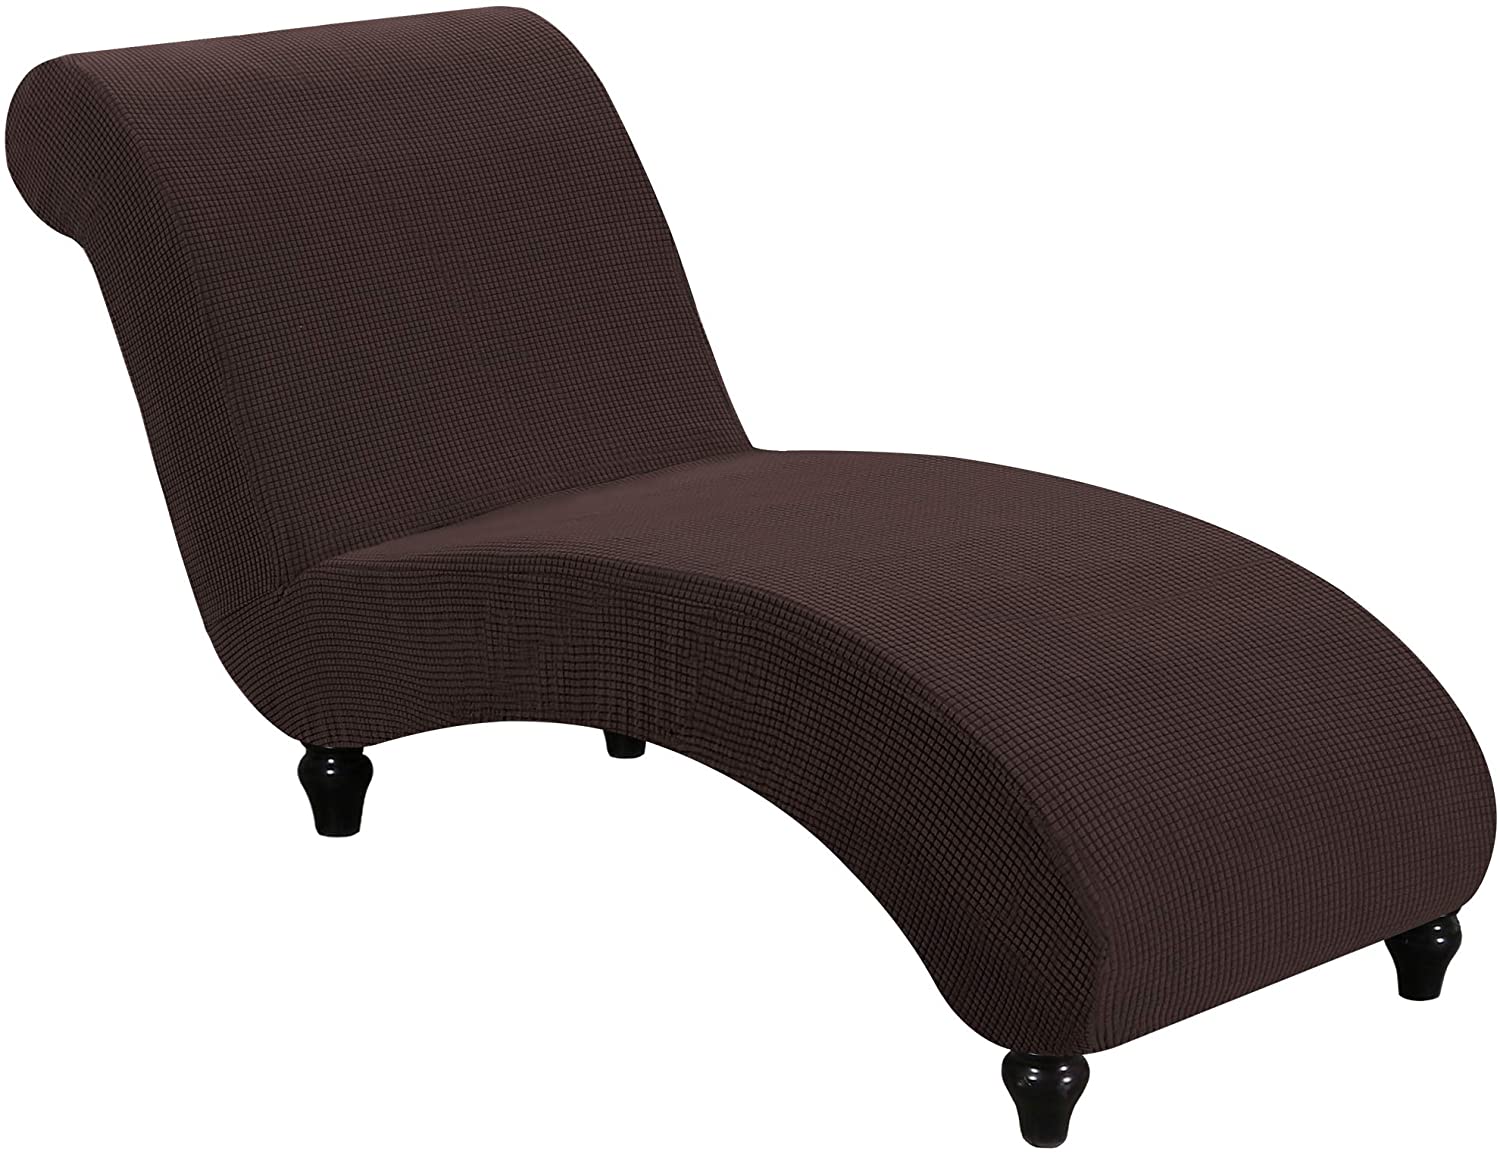 Chaise Lounge Covers